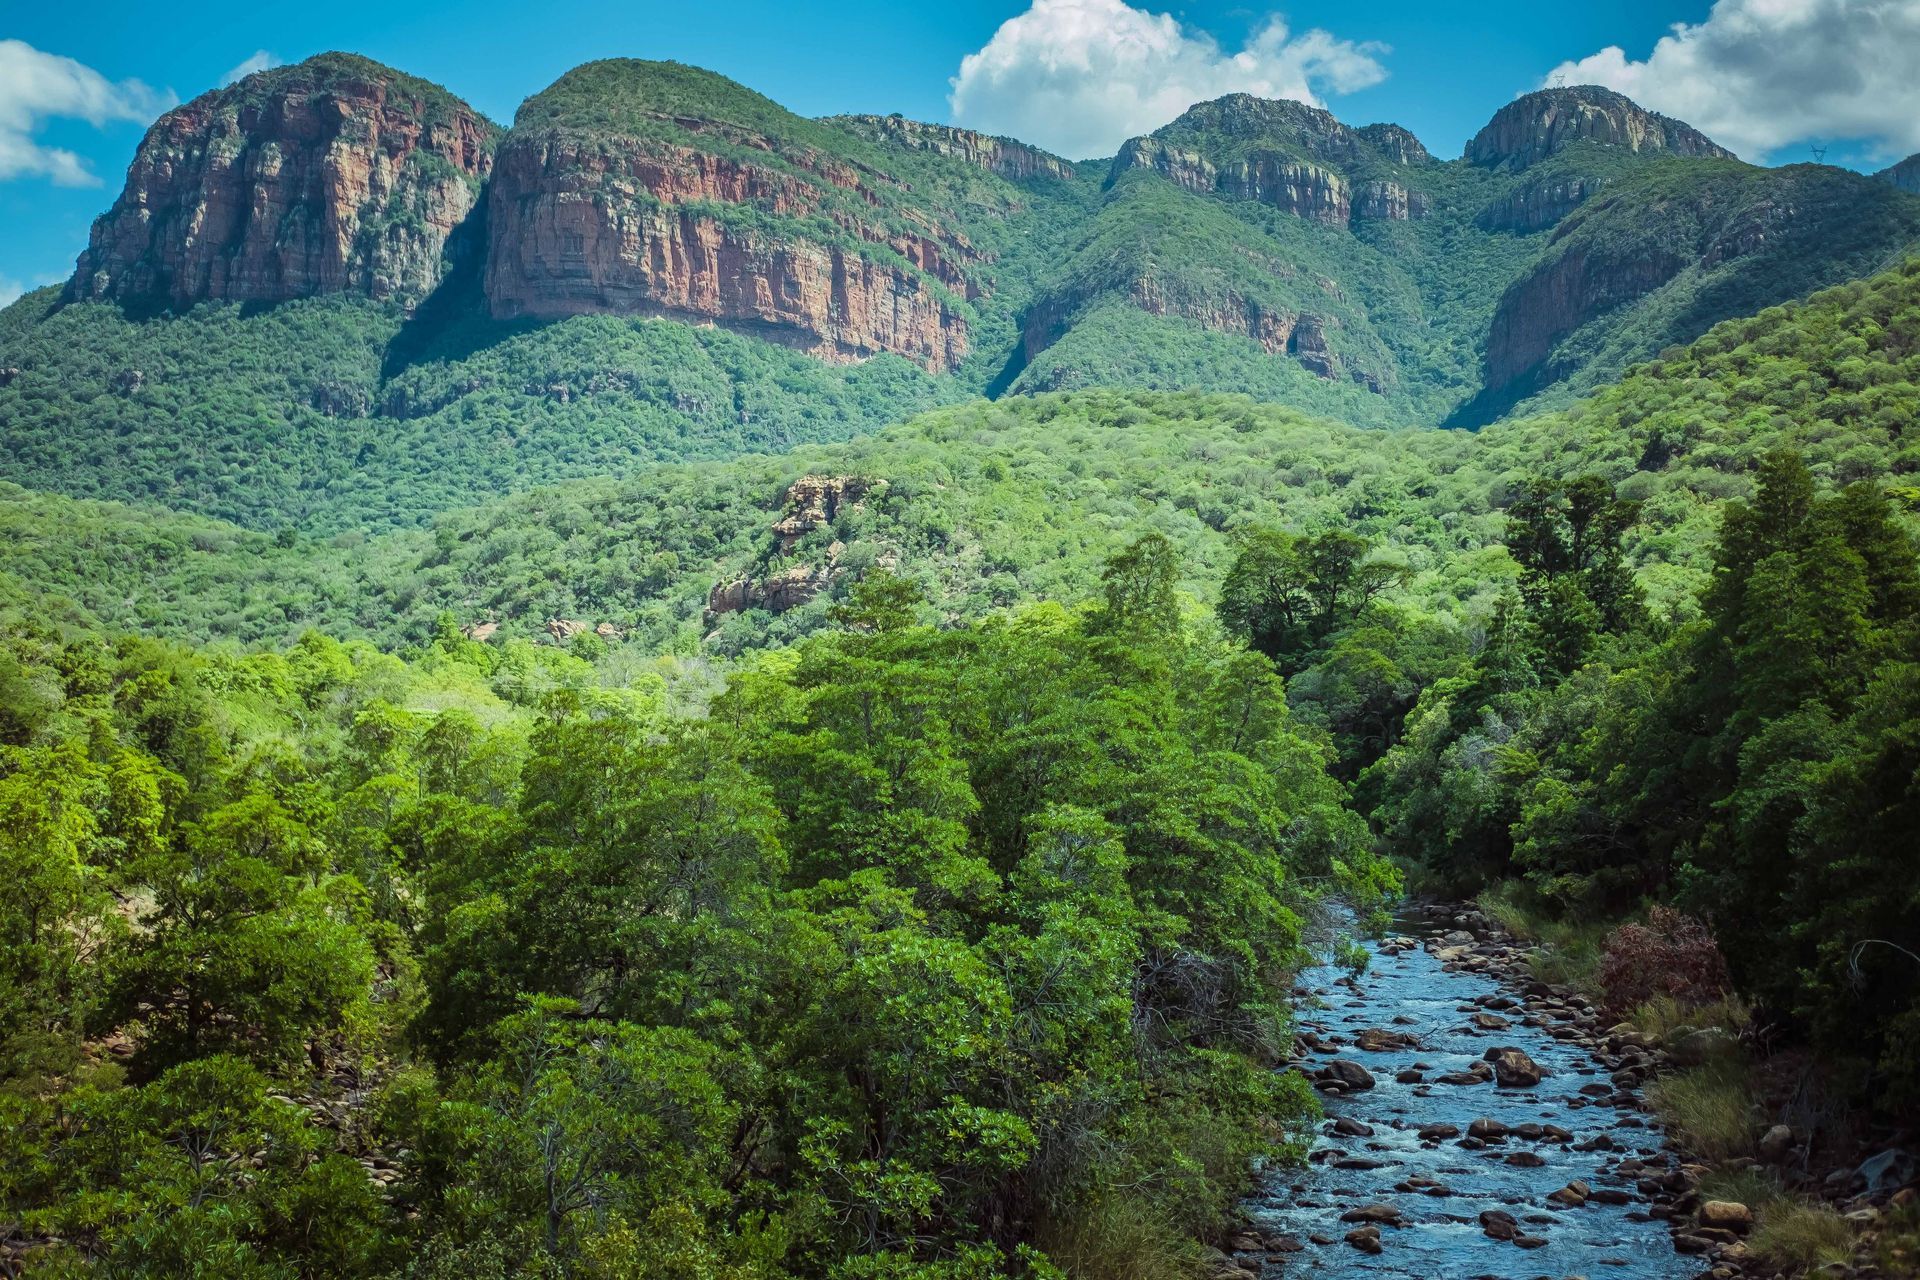 a river flowing through a lush green forest with mountains in the background .